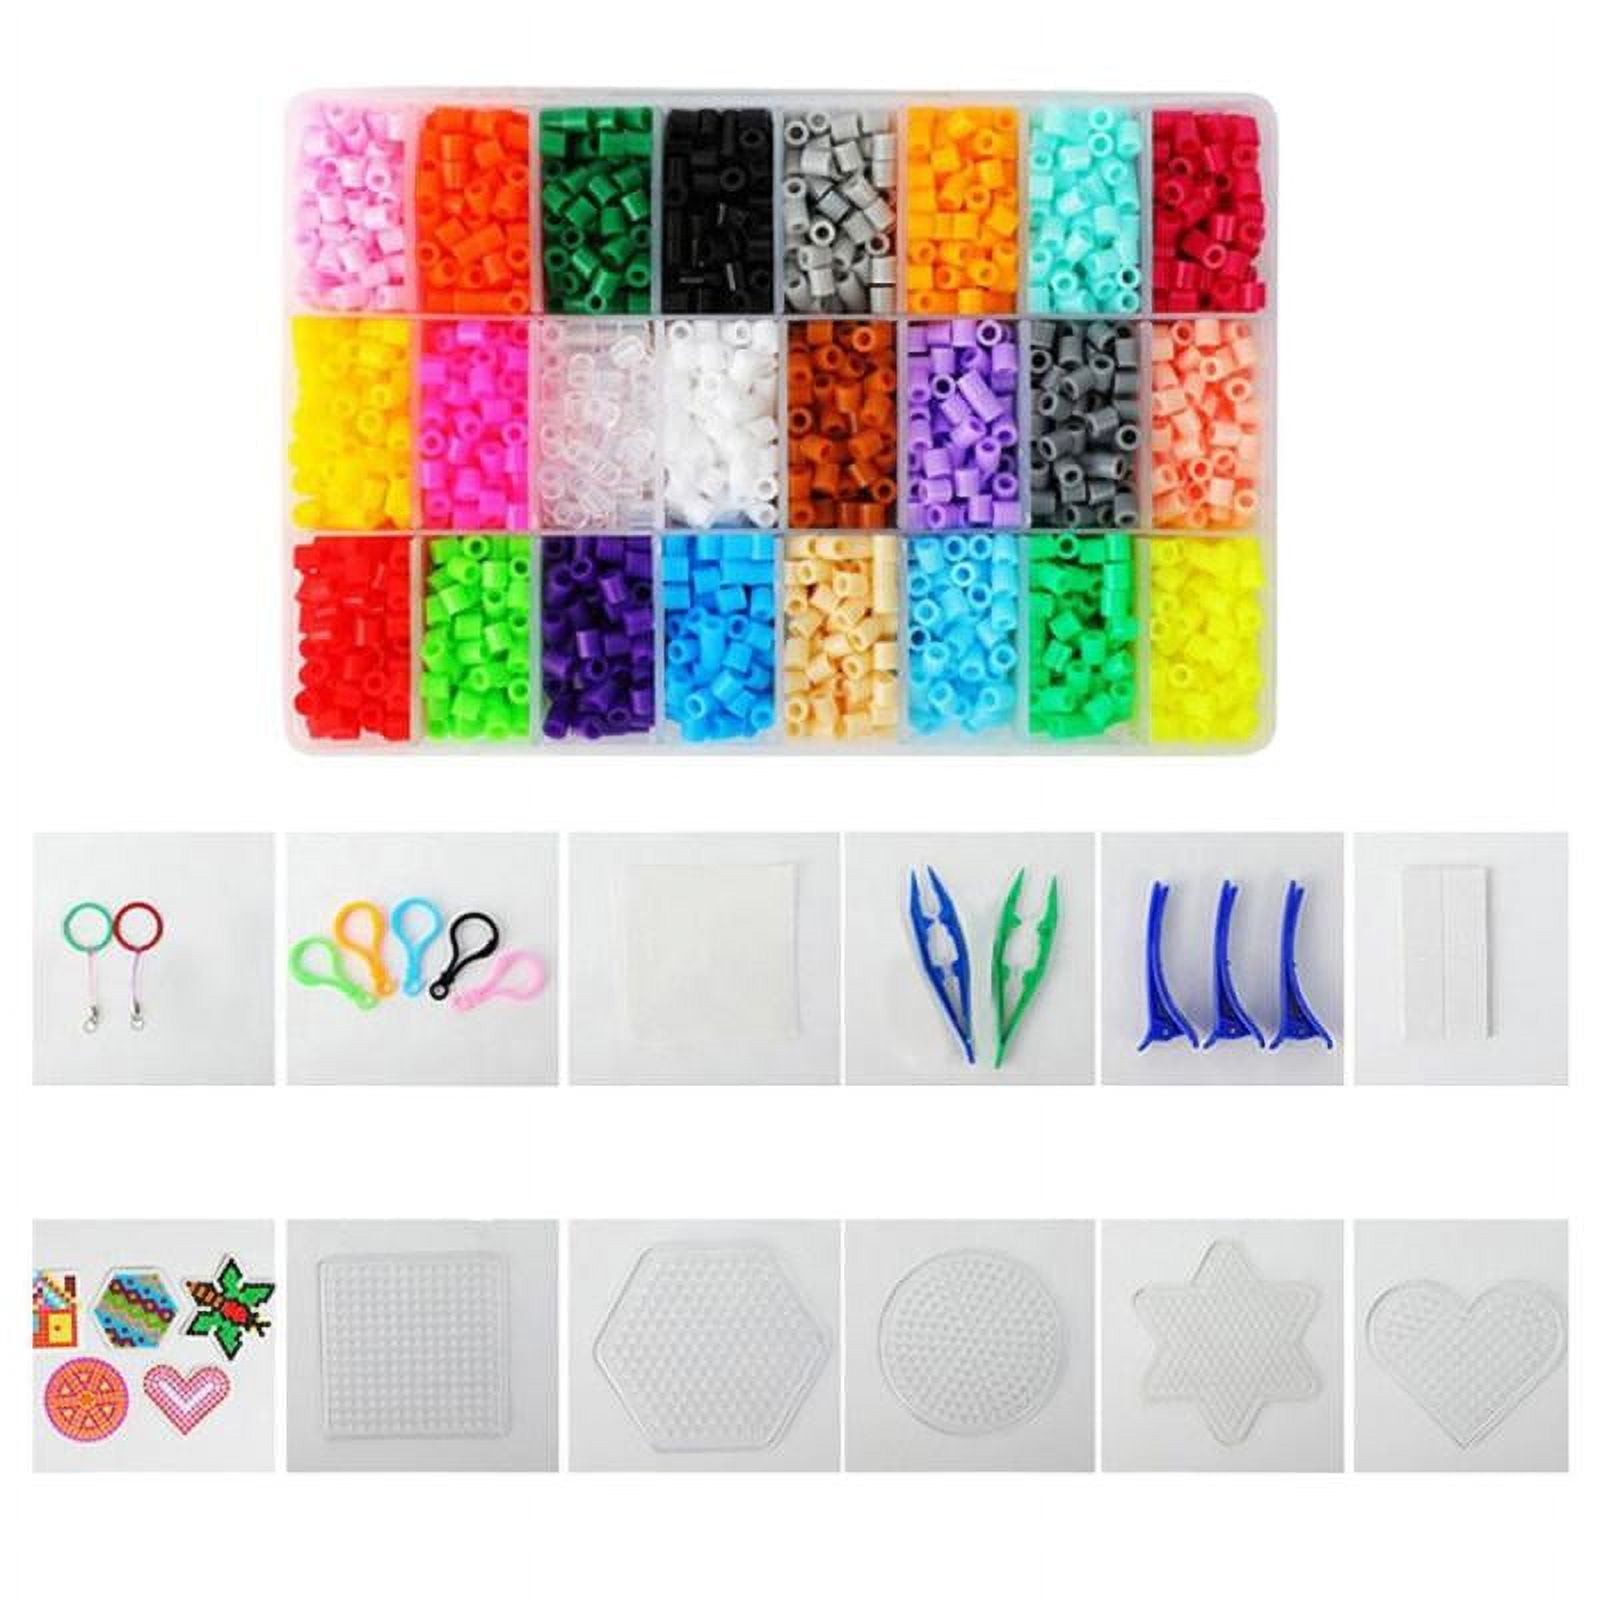 23,000 pcs Fuse Beads Kit for Kids Crafts, 30 Colors Iron Beads